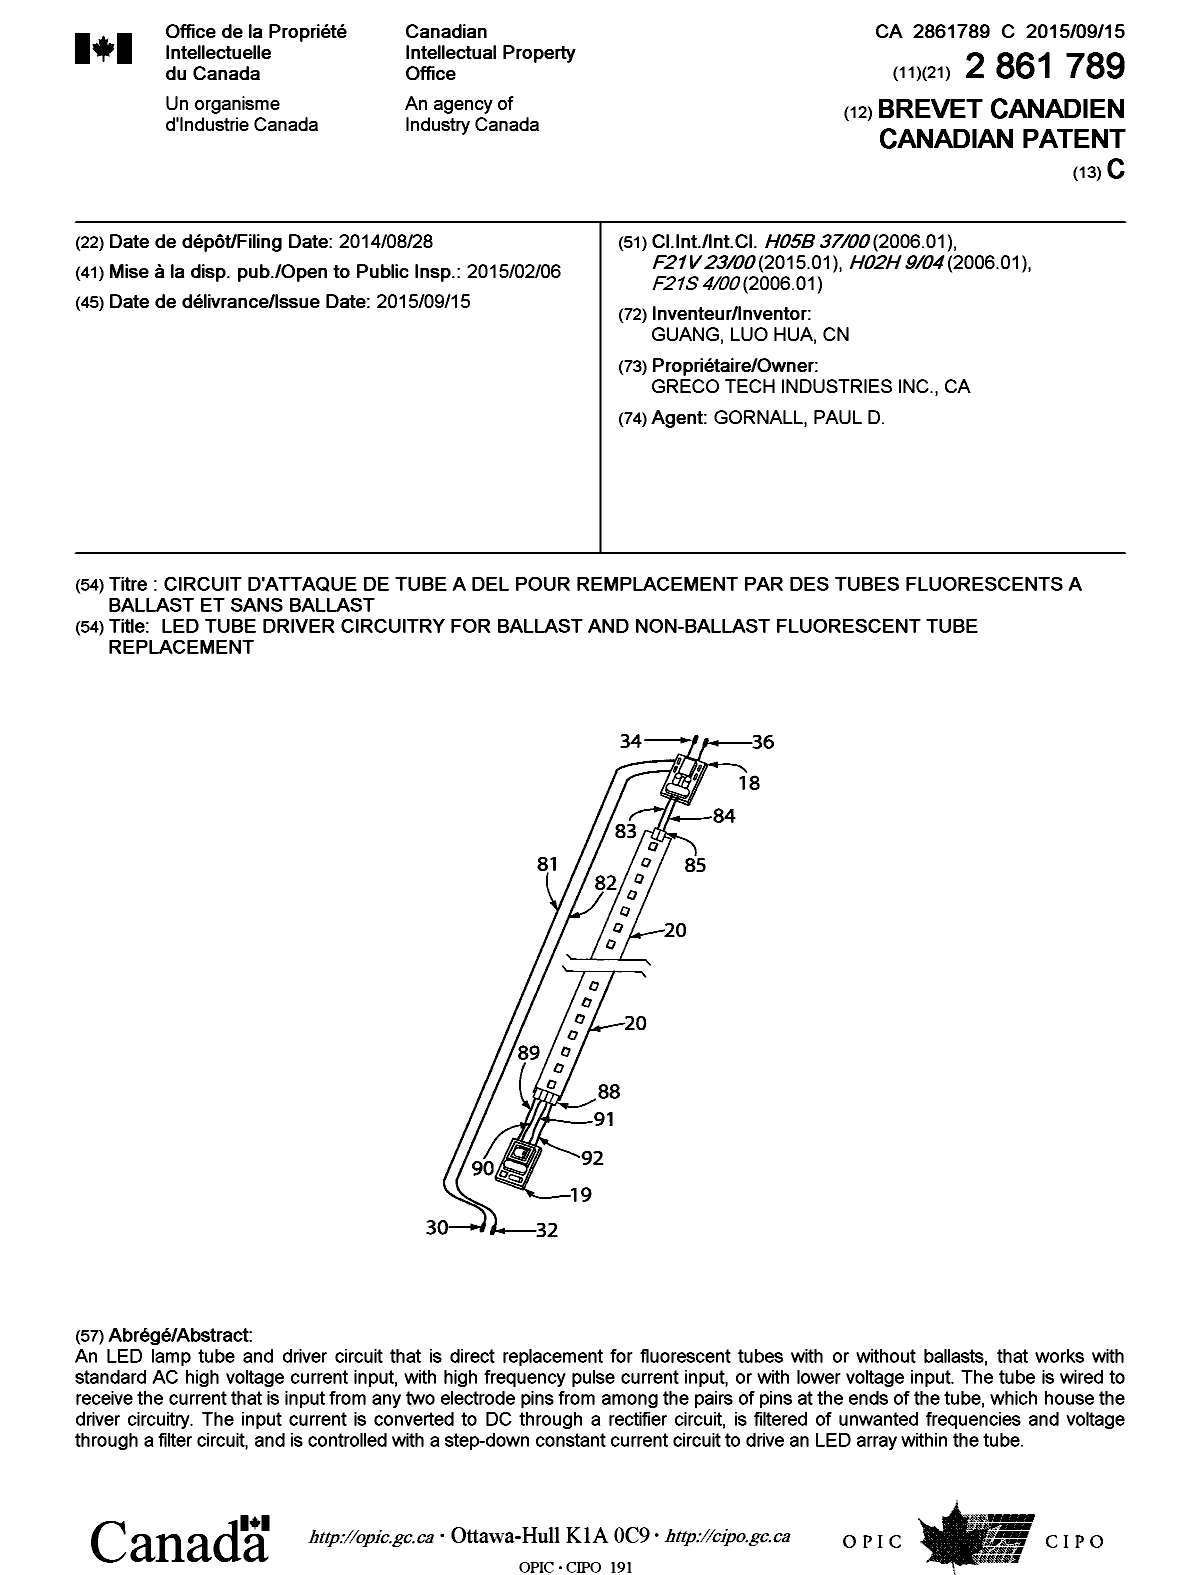 Canadian Patent Document 2861789. Cover Page 20141213. Image 1 of 1